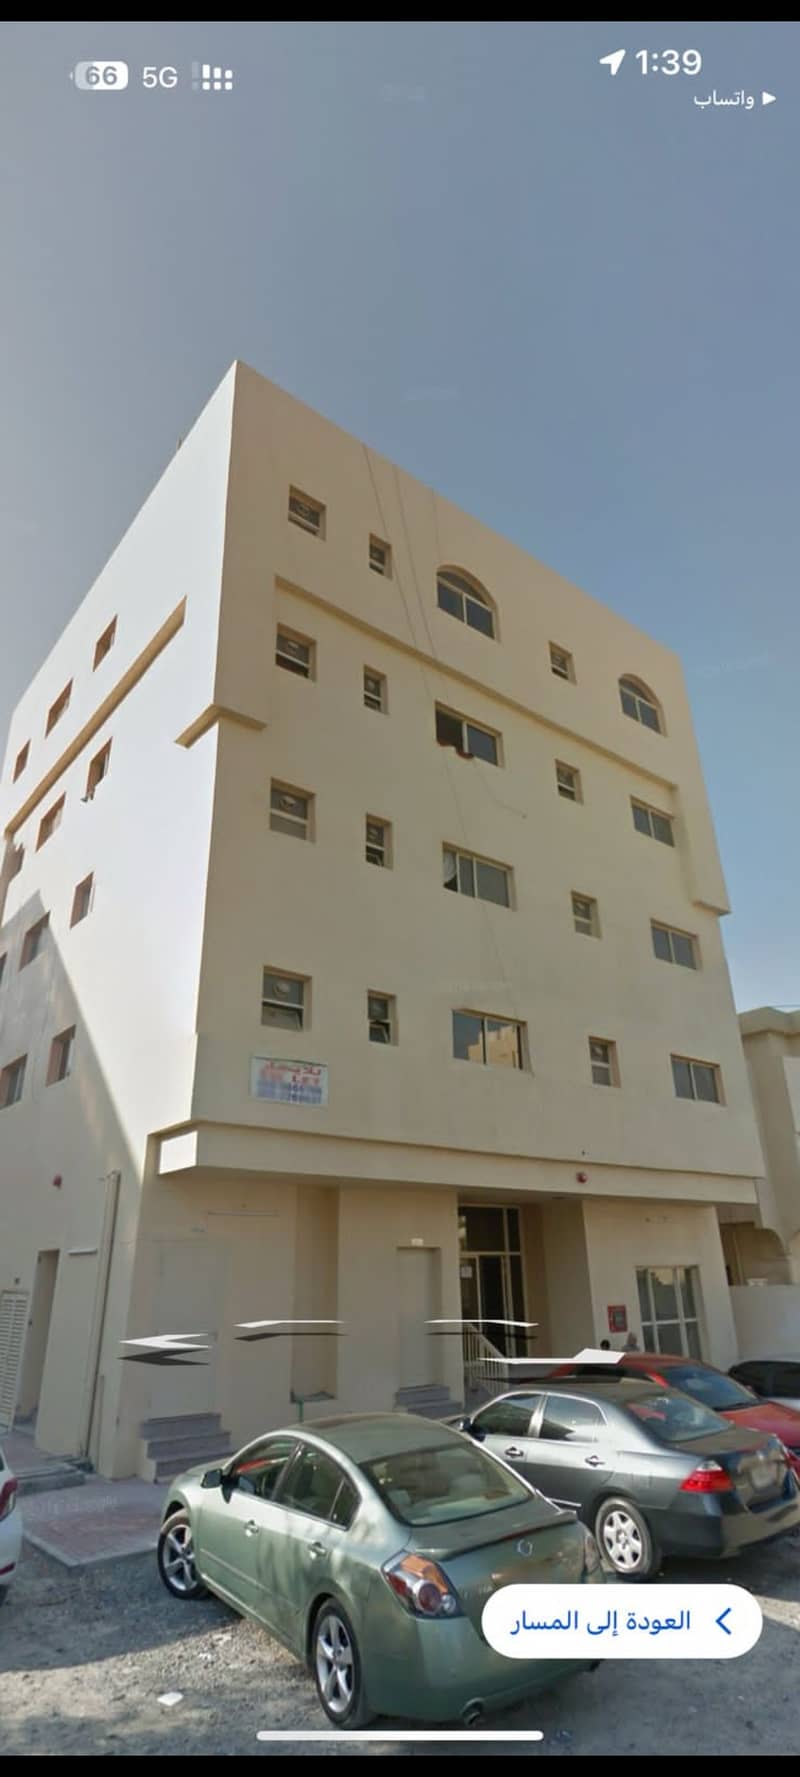 A snapshot building for sale in Ajman, Al Nuaimiya area

 An area of ​​3600 square feet

 It consists of ground floor and 4 floors

 The building consists of 18 one-bedroom apartments and a living room

 And one store

 With a very good income

 The build